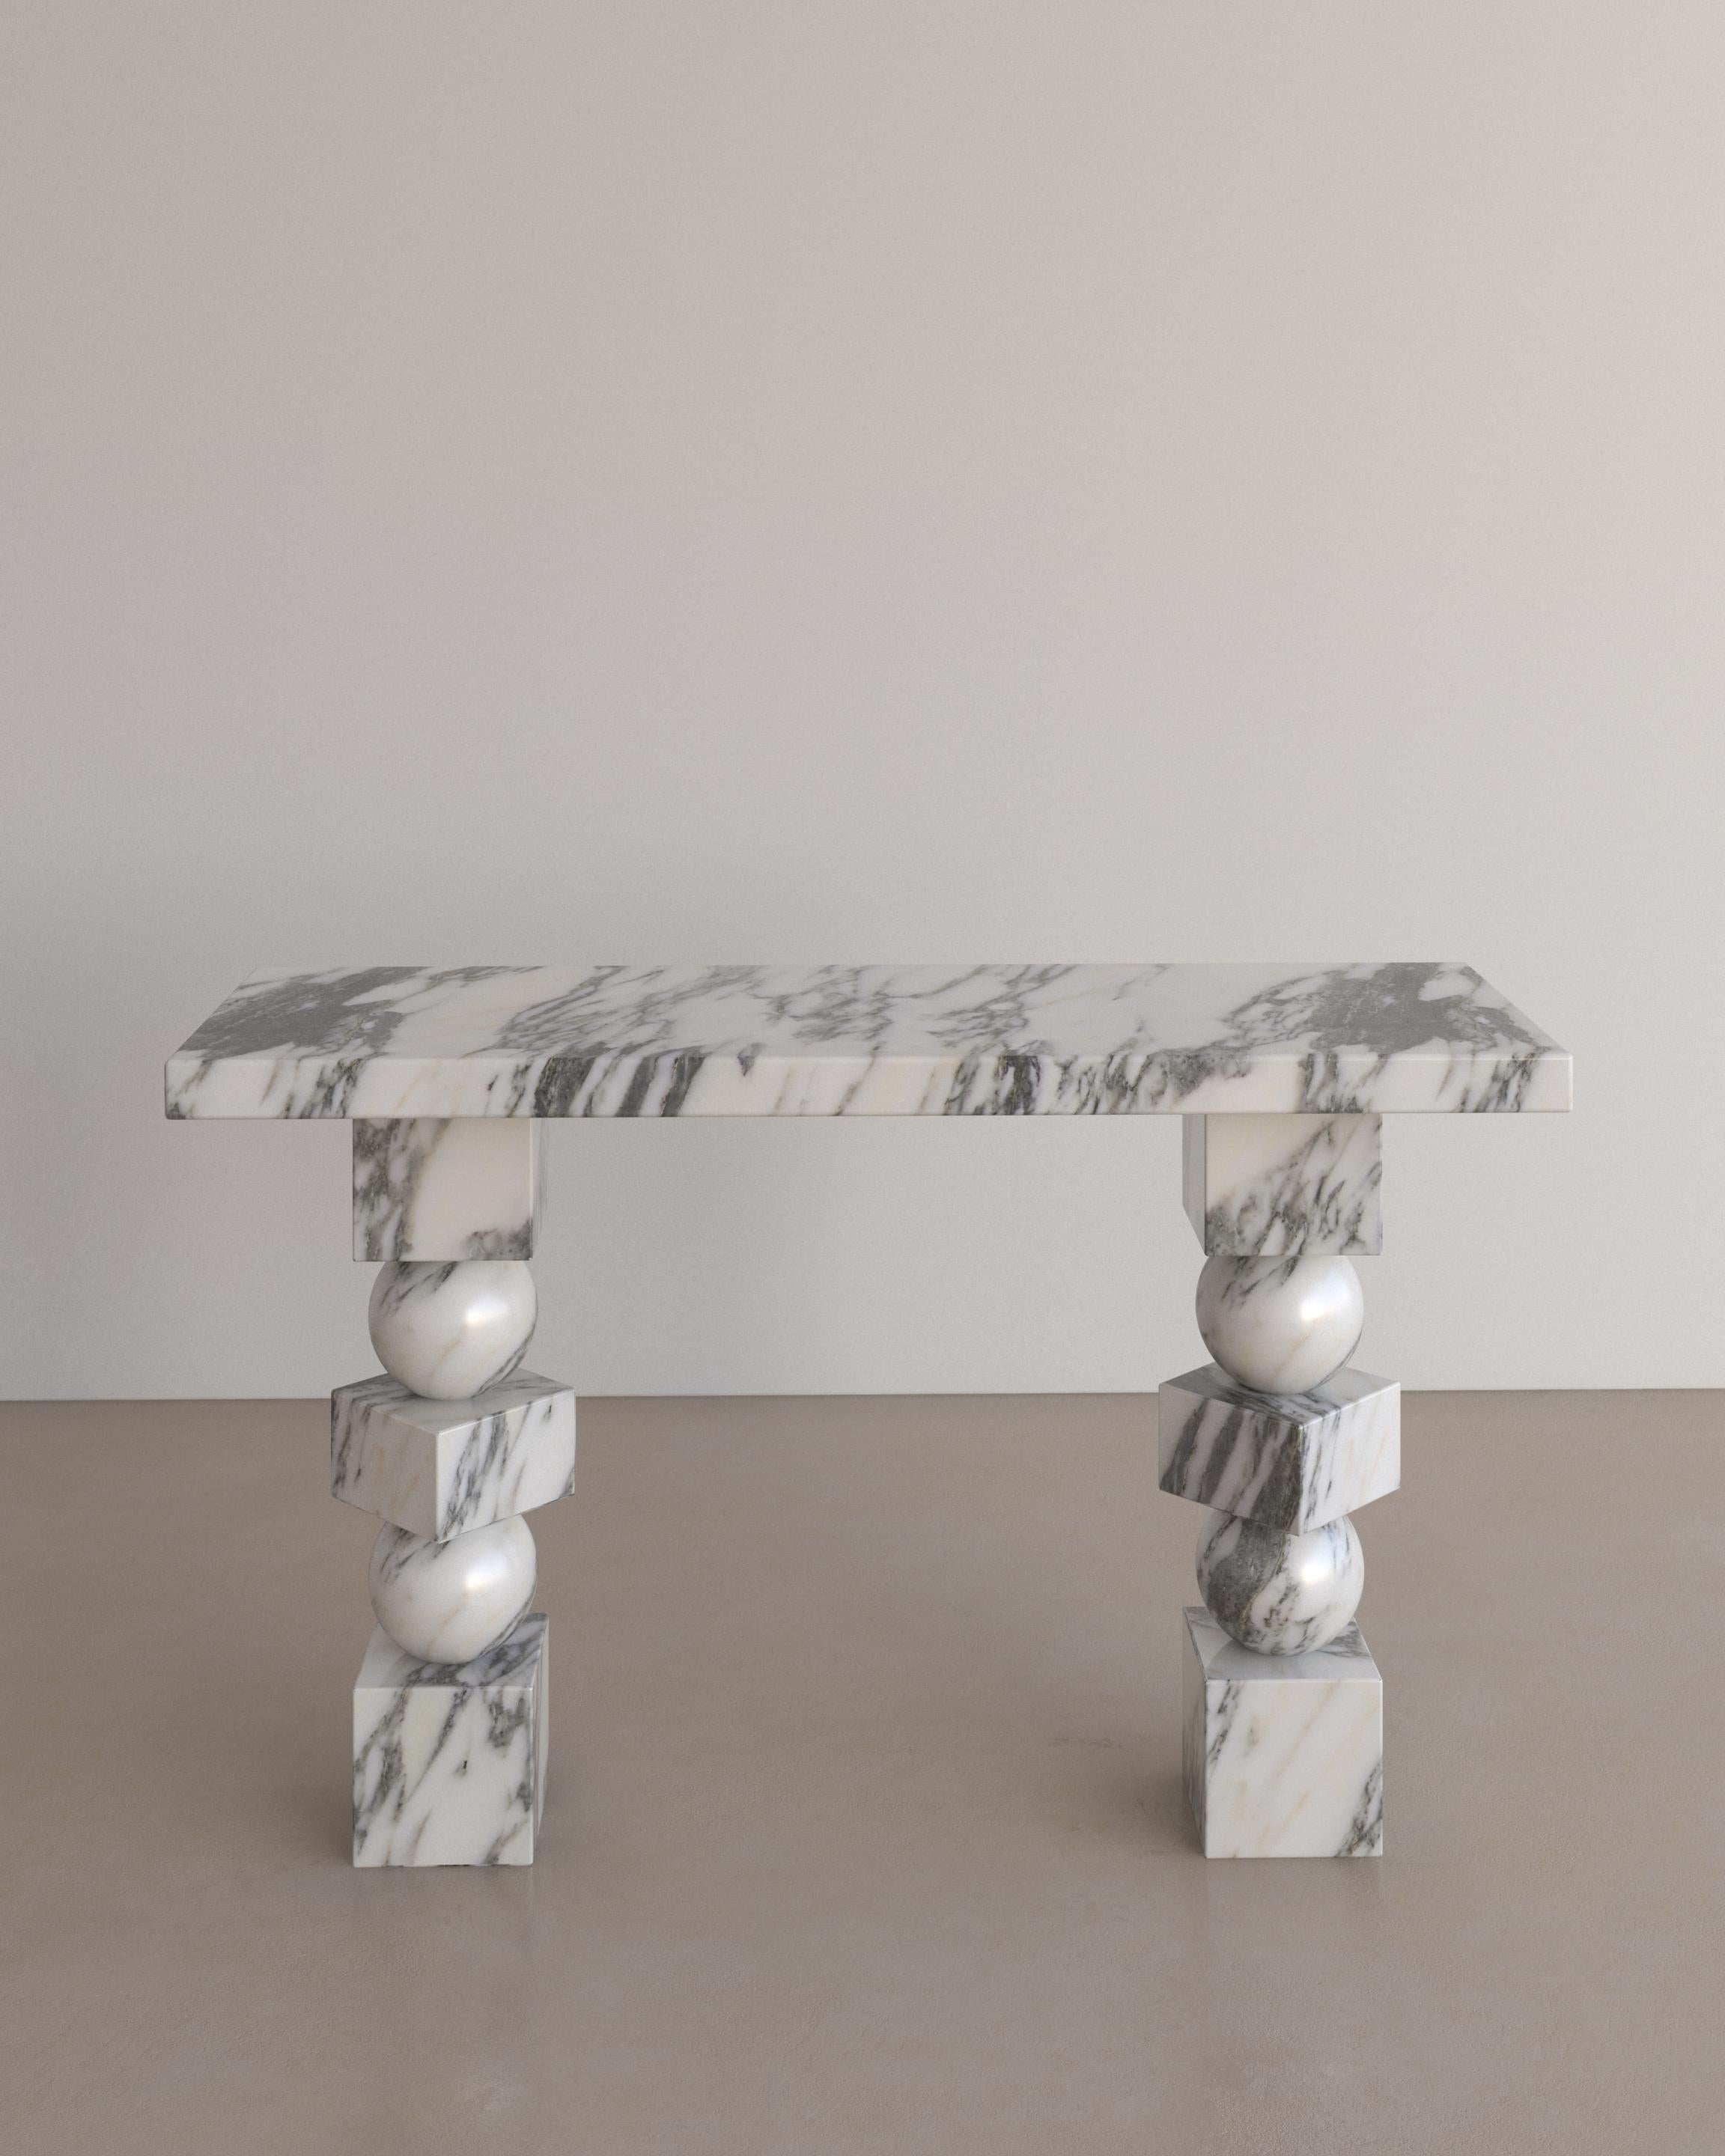 The Sufi Console Table in Bianco Arabescato Marble by The Essentialist celebrates proportion, scale and ancestral power. Three simple geometric shapes, stacked in a sequence bursts with undeniable energy, courtesy of the natural stone they are